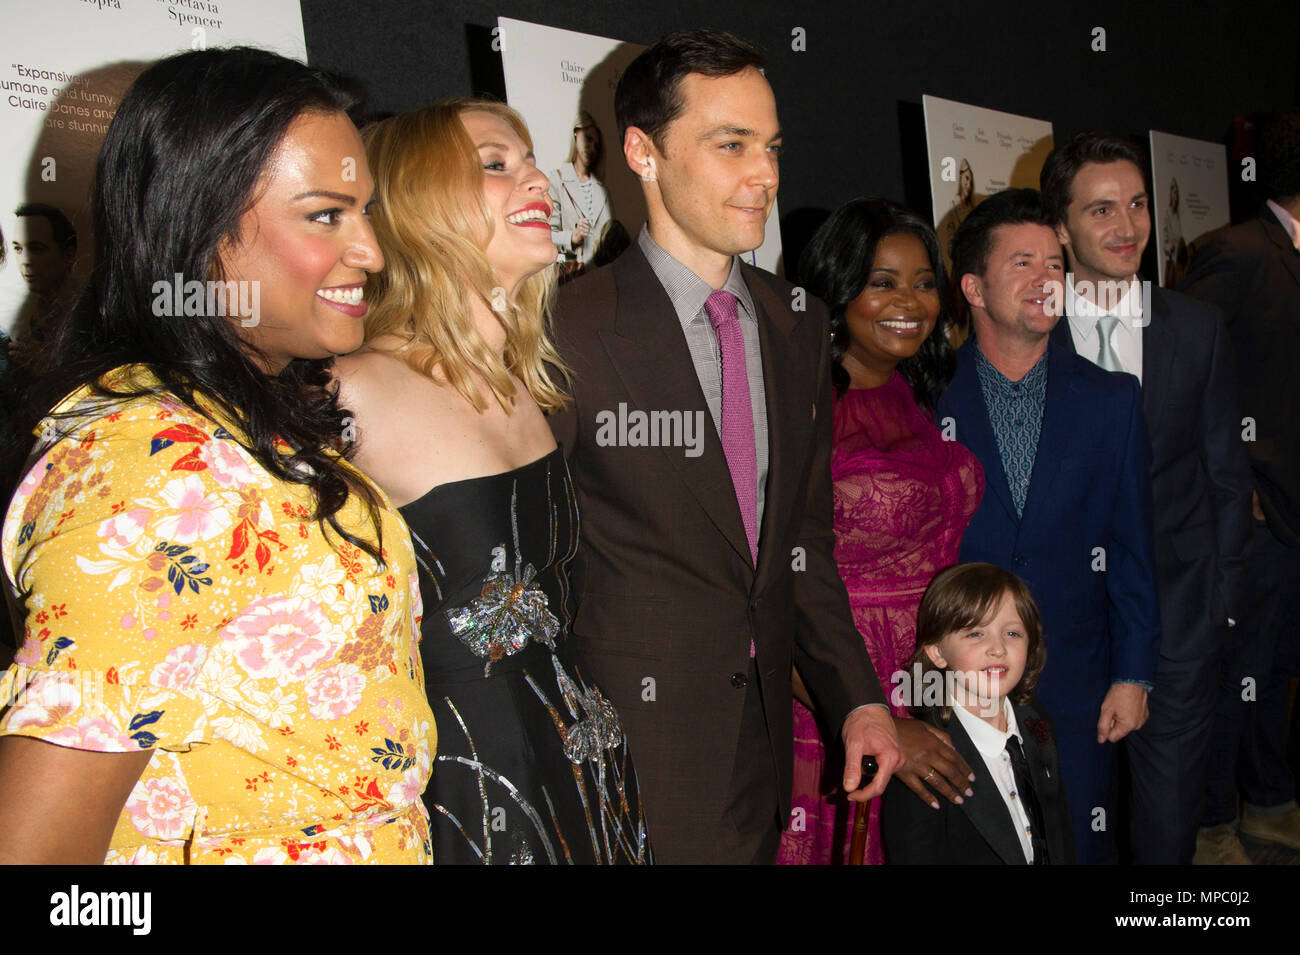 New York, USA. 21st May, 2018. (L-R) Actors Aneesh Sheth, Claire Danes, Jim Parsons, Leo James Davis, Octavia Spencer, director Silas Howard and screenwriter Daniel Pearle attend 'A Kid Like Jake' New York premiere at The Landmark at 57 West on May 21, 2018 in New York City. Credit: Ron Adar/Alamy Live News Stock Photo